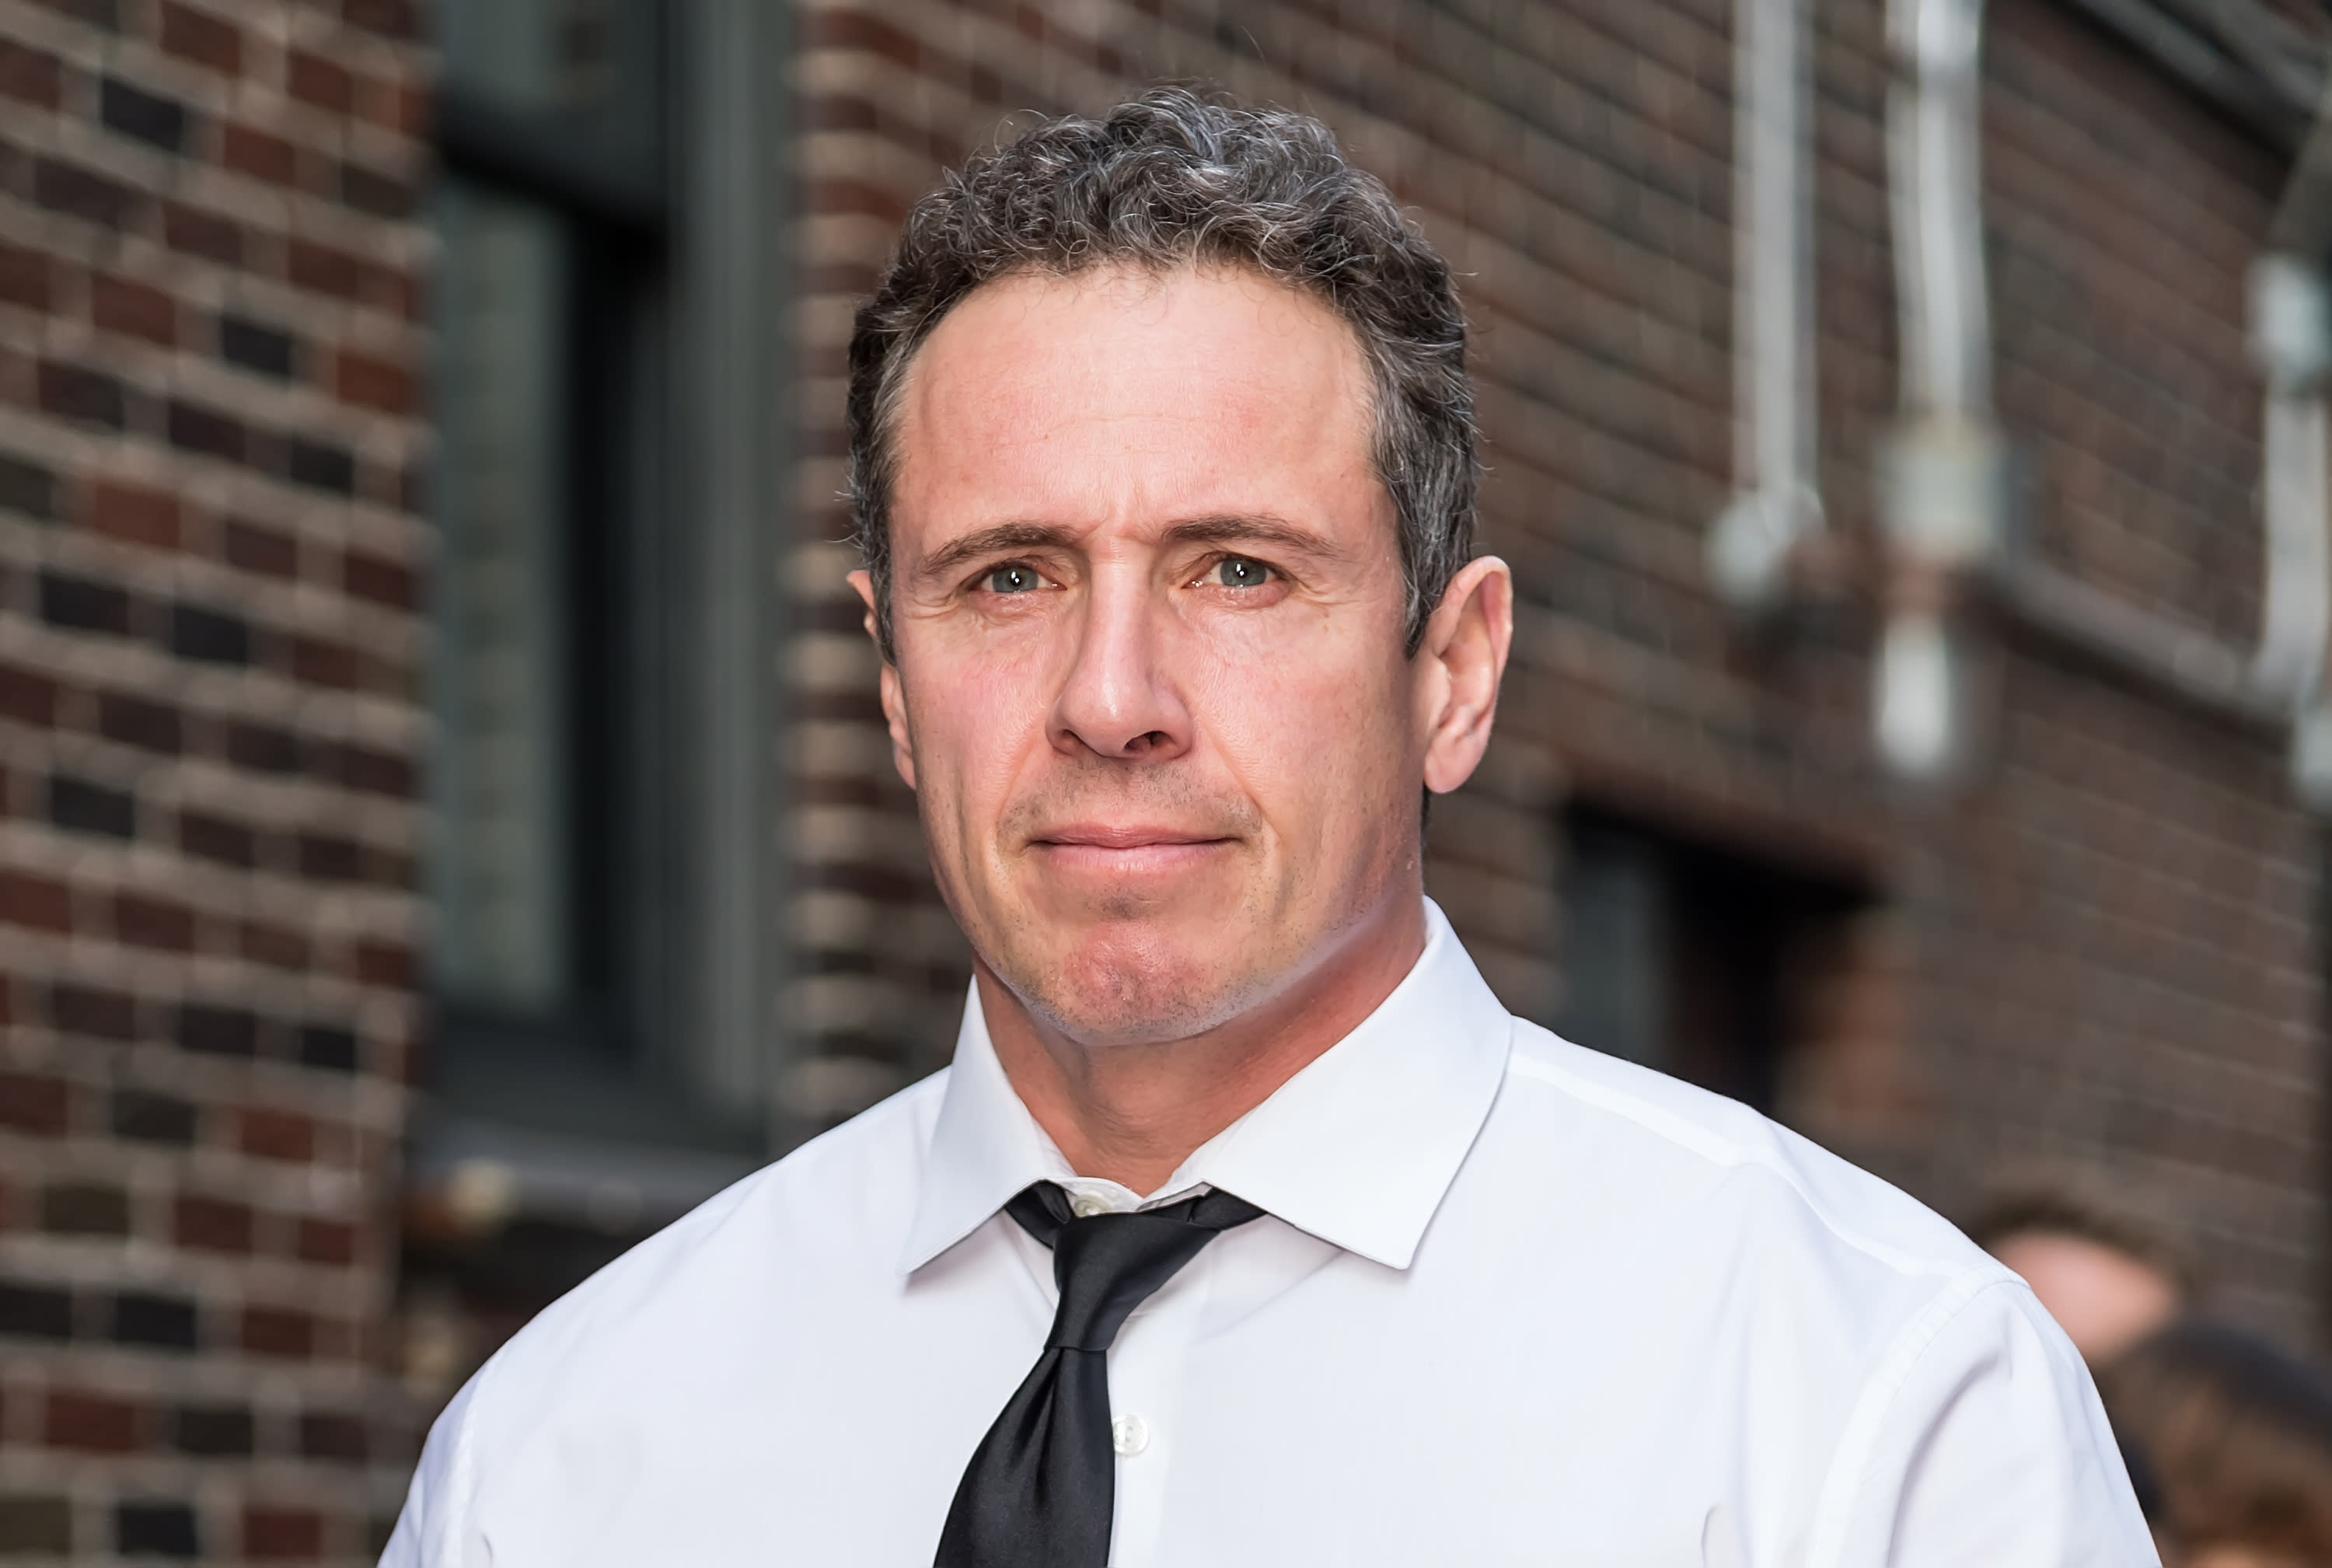 Sexual misconduct allegation against CNN’s Chris Cuomo led to his firing, attorn..